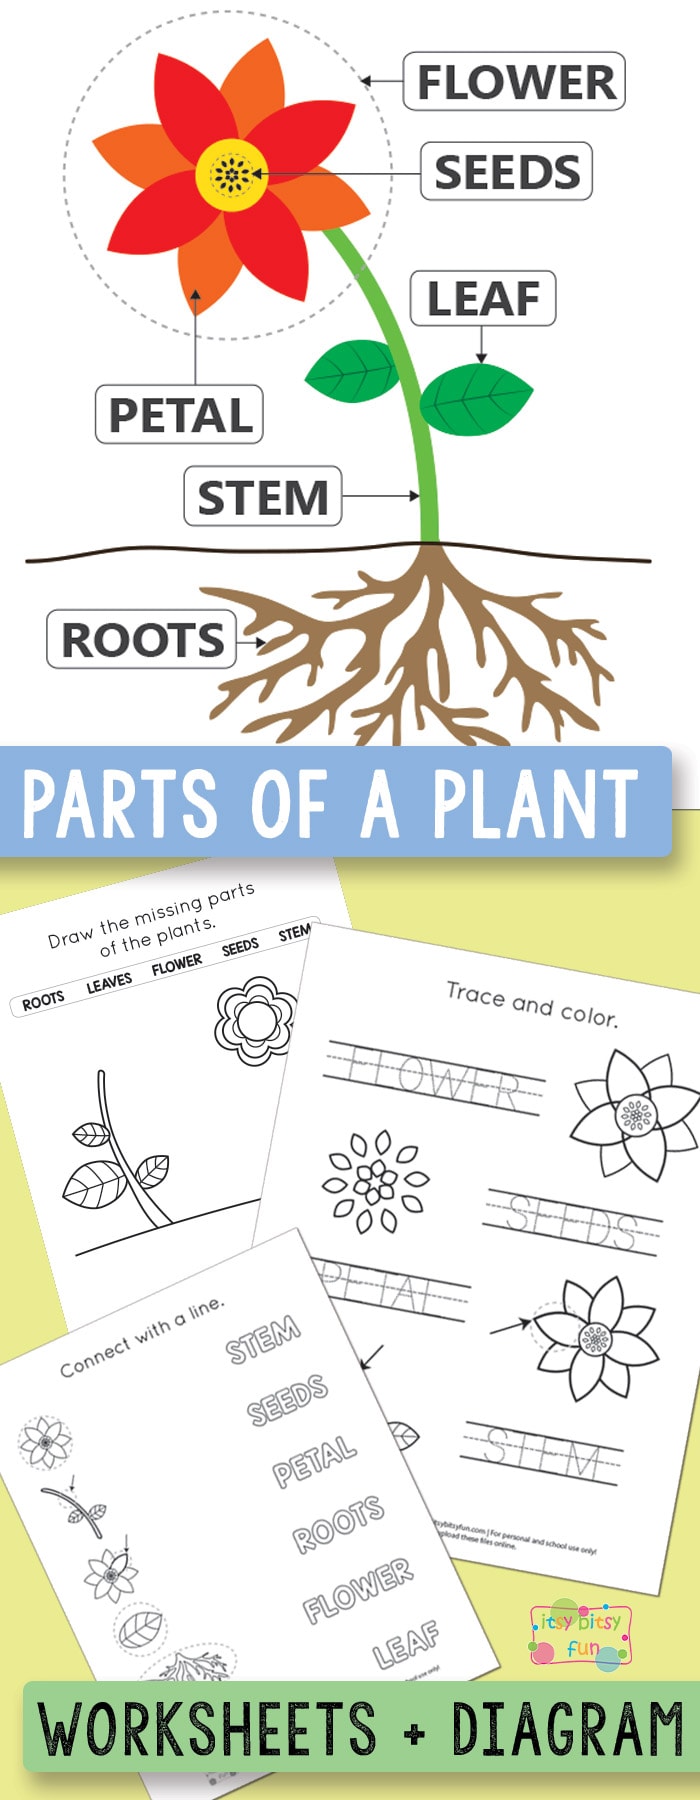 Parts of a Plant Worksheets Kindergarten and 1st Grade #kindergartenworksheets #1stgradeworksheets #freeprintables